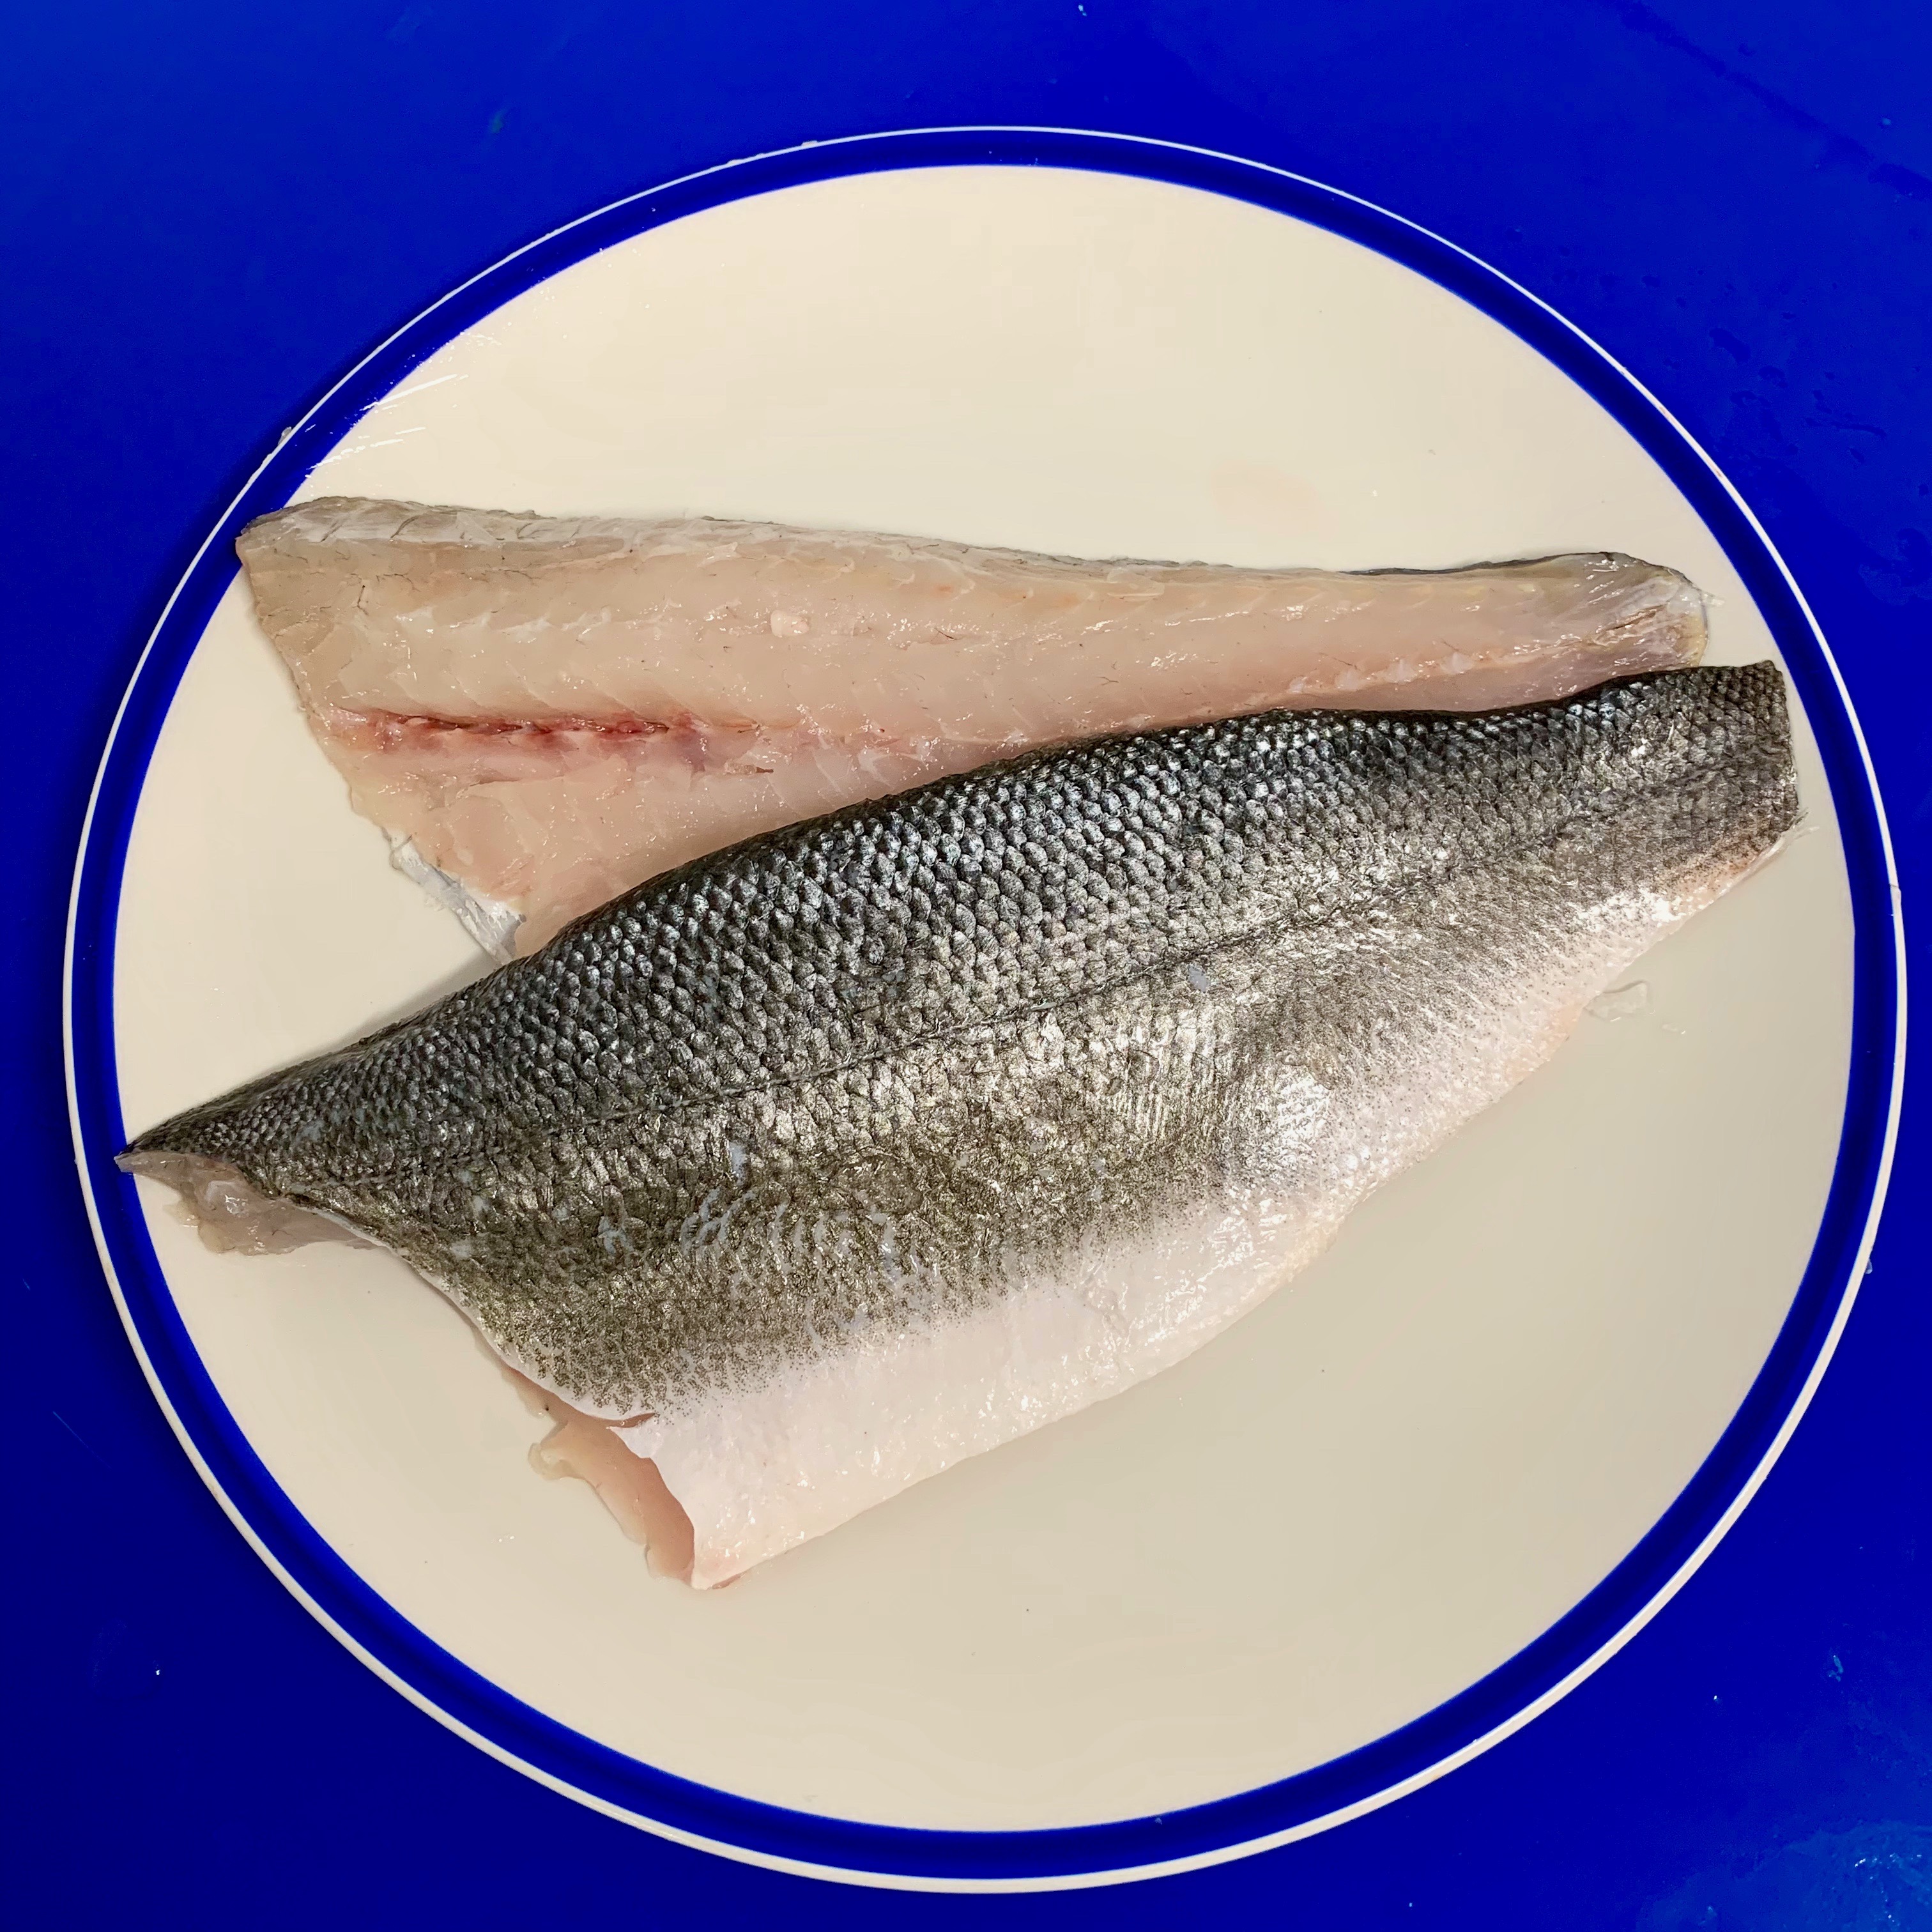 Large Sea bass fillets (x2 ) farmed | Buy Online - Free Nationwide Delivery